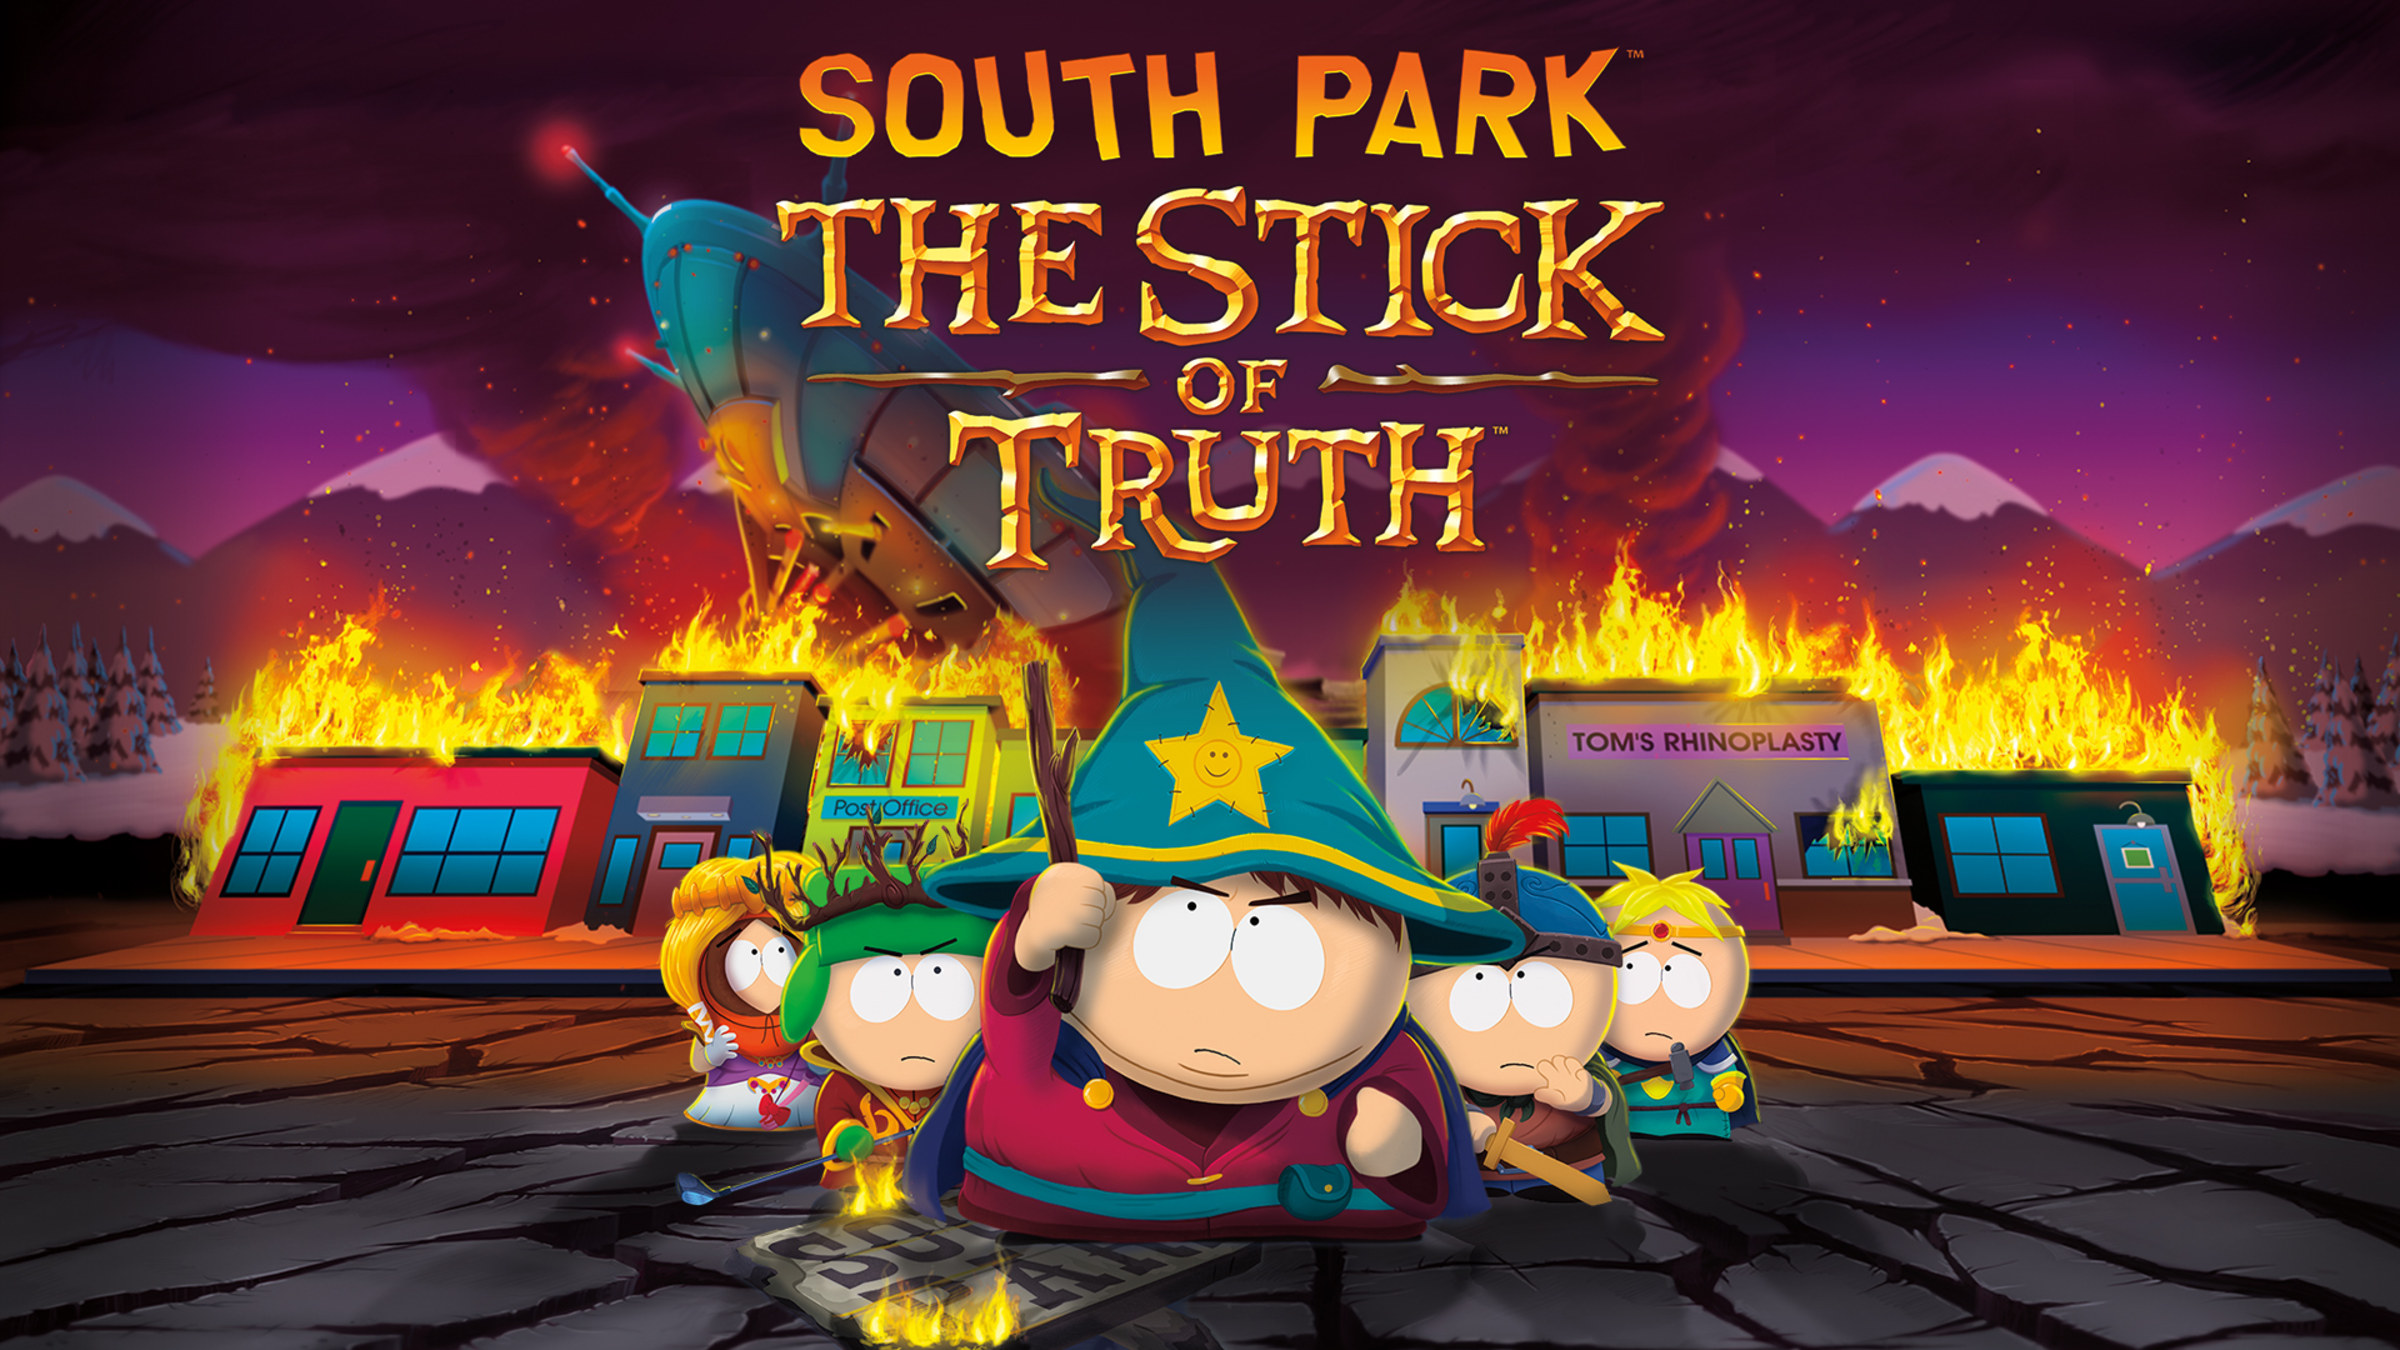 https://assets.nintendo.com/image/upload/c_fill,w_1200/q_auto:best/f_auto/dpr_2.0/ncom/en_US/games/switch/s/south-park-the-stick-of-truth-switch/hero